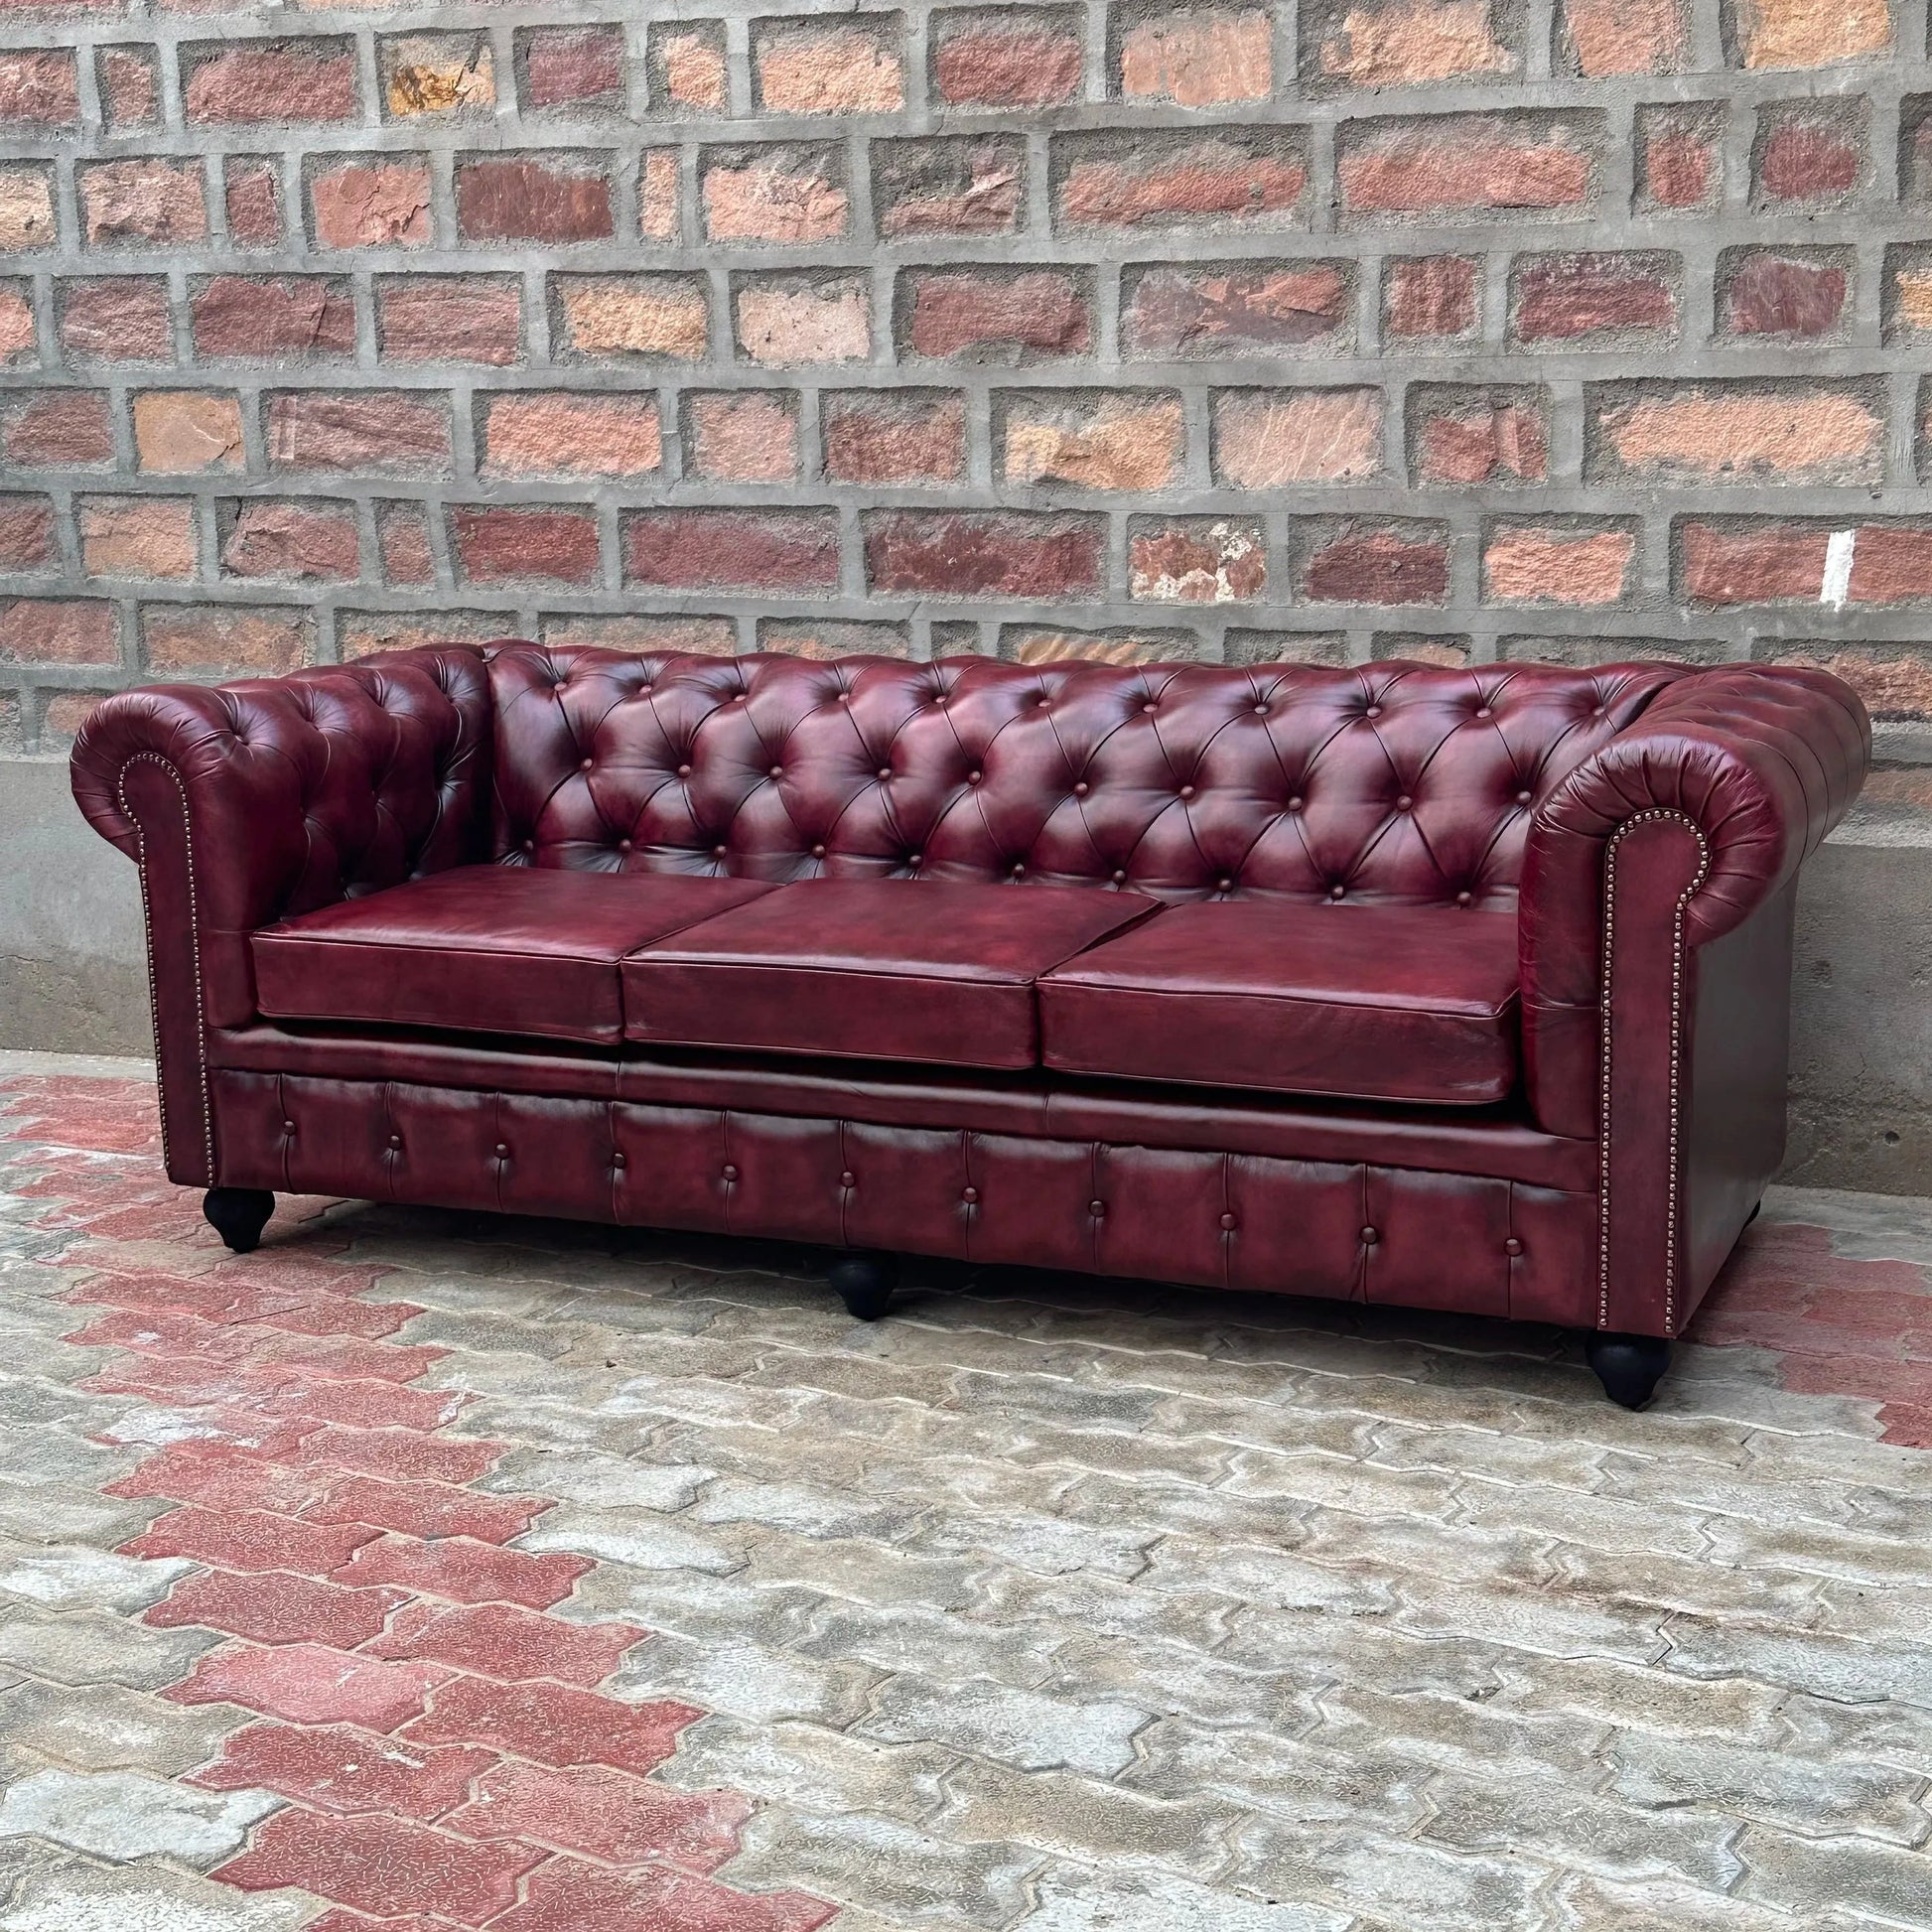 87" Sofa Normal Cushions | Oxford Red Chesterfield Leather Sofa with Normal Cushions (OR-3C) by Rising Tide Design Co.